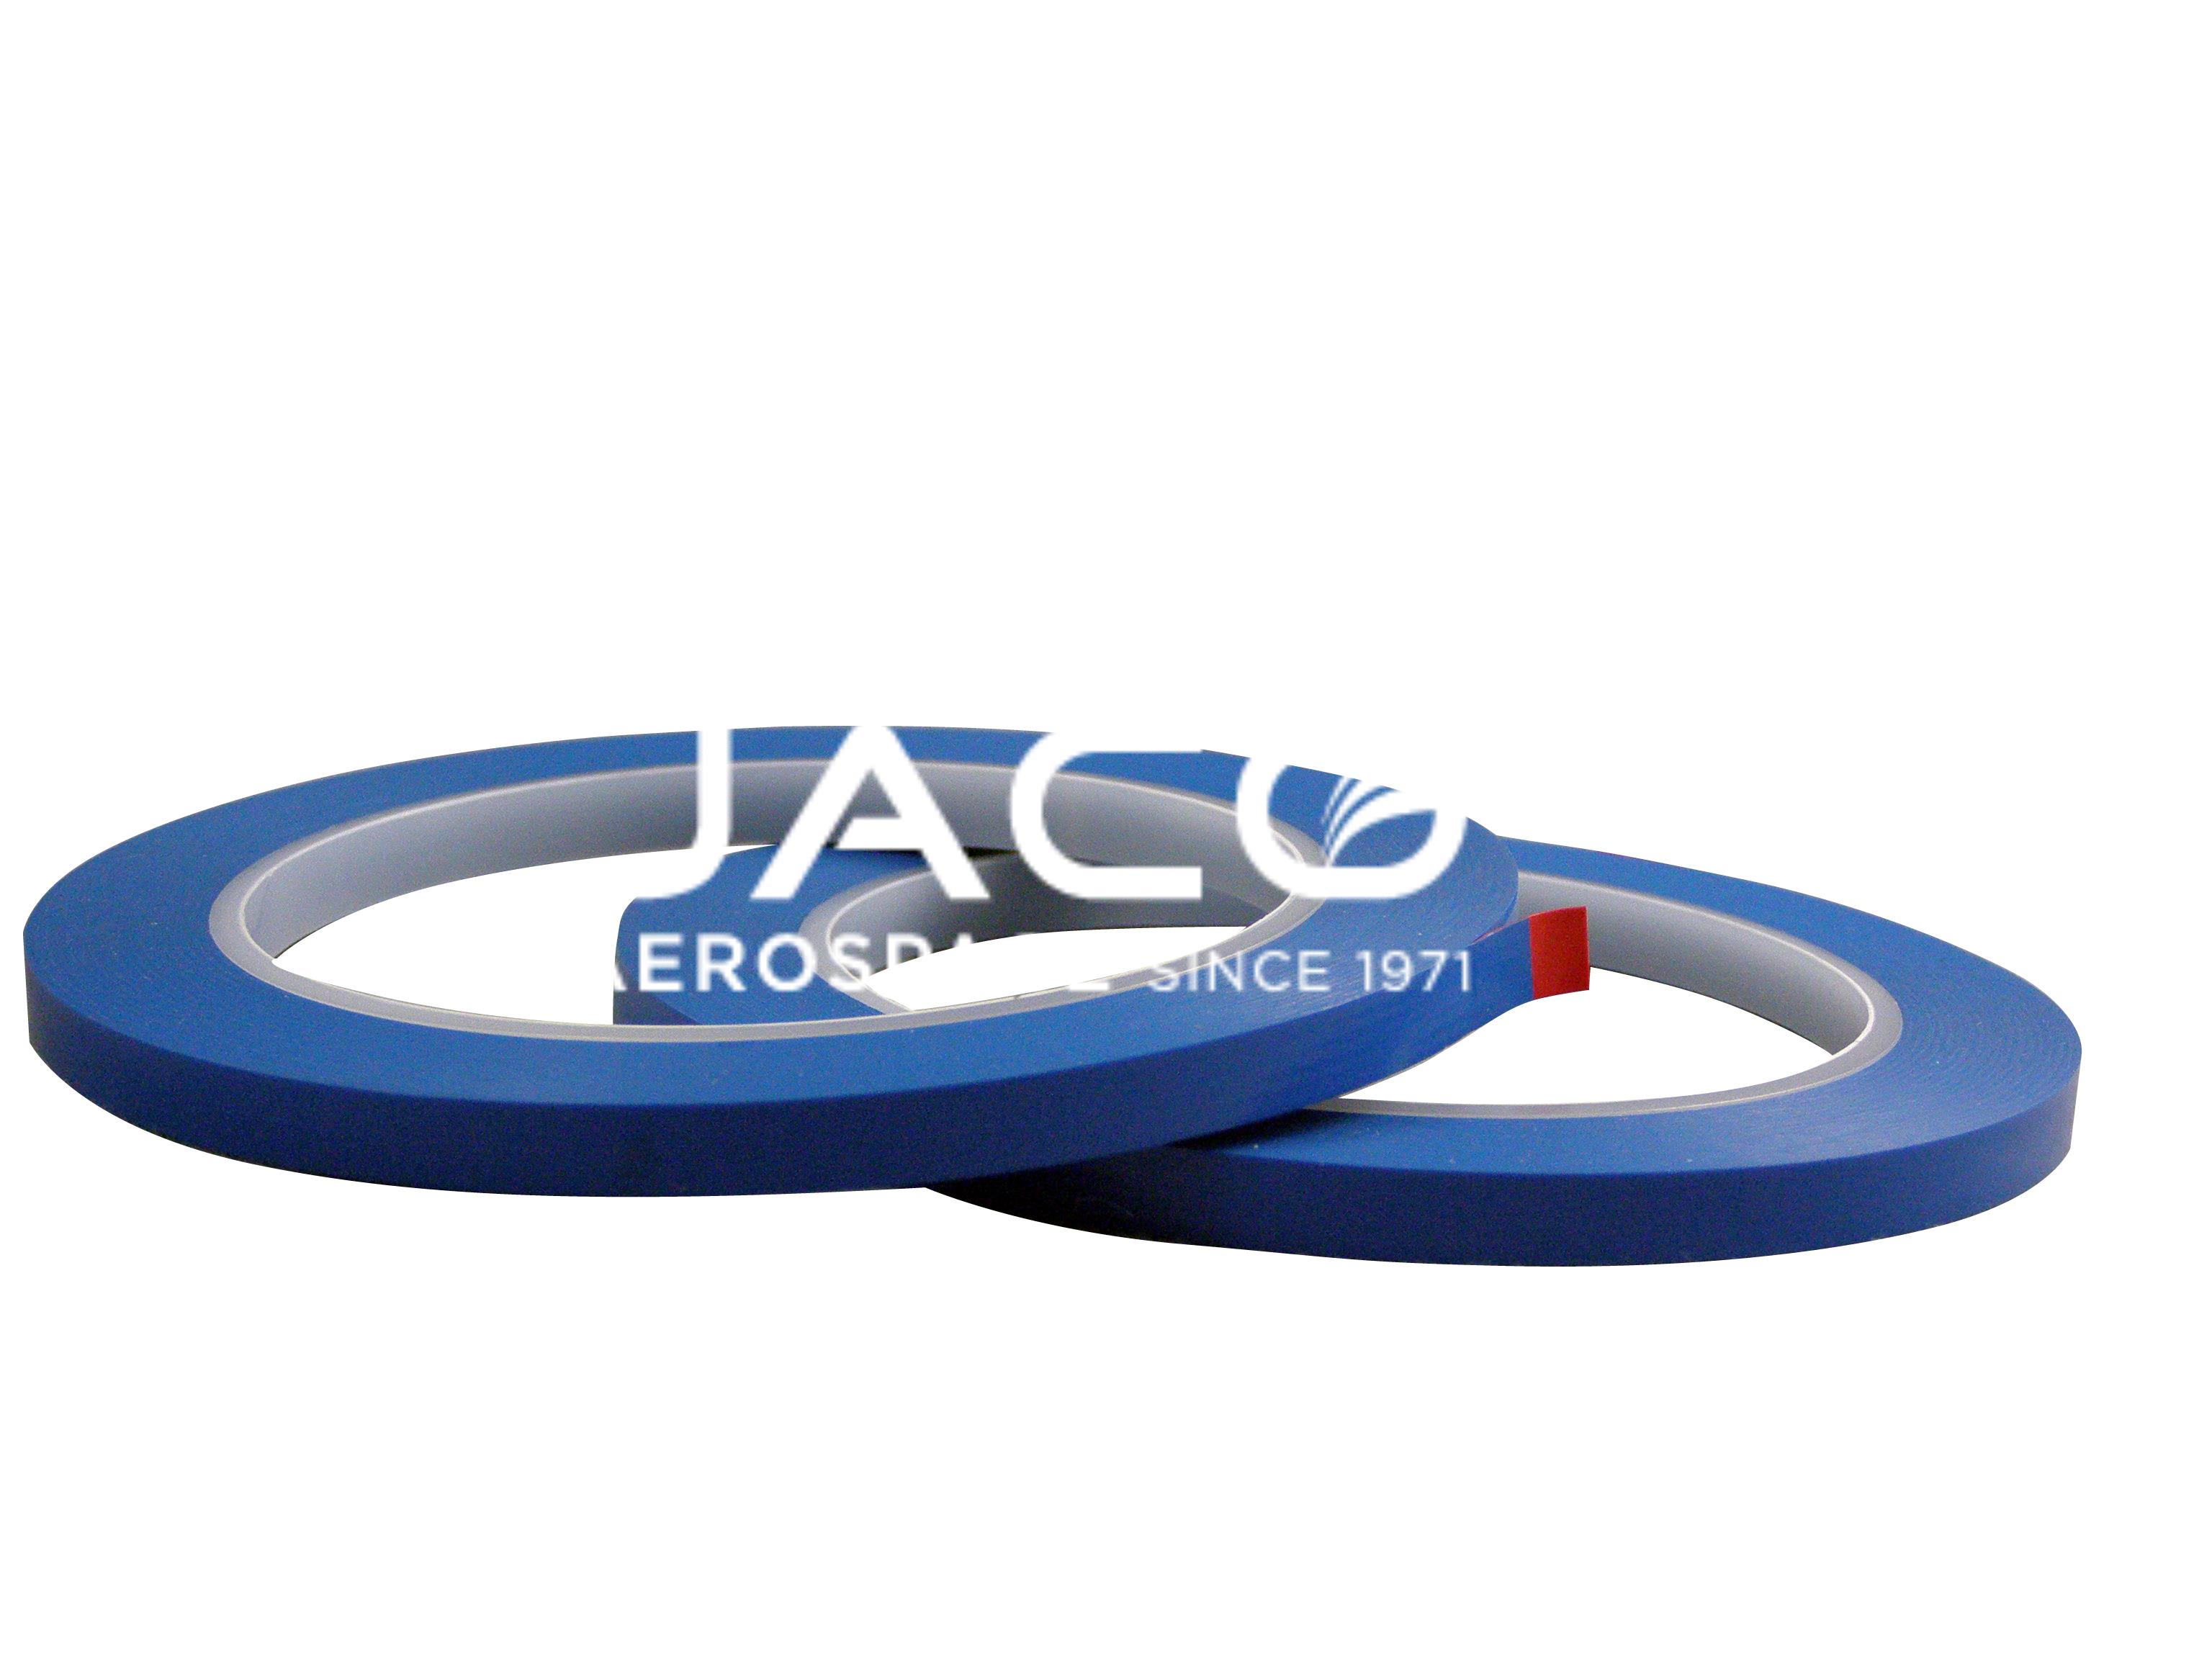  - Patco 172/172-68 Automotive Fineline Masking Tape - Available self wound or with a kraft paper release liner.